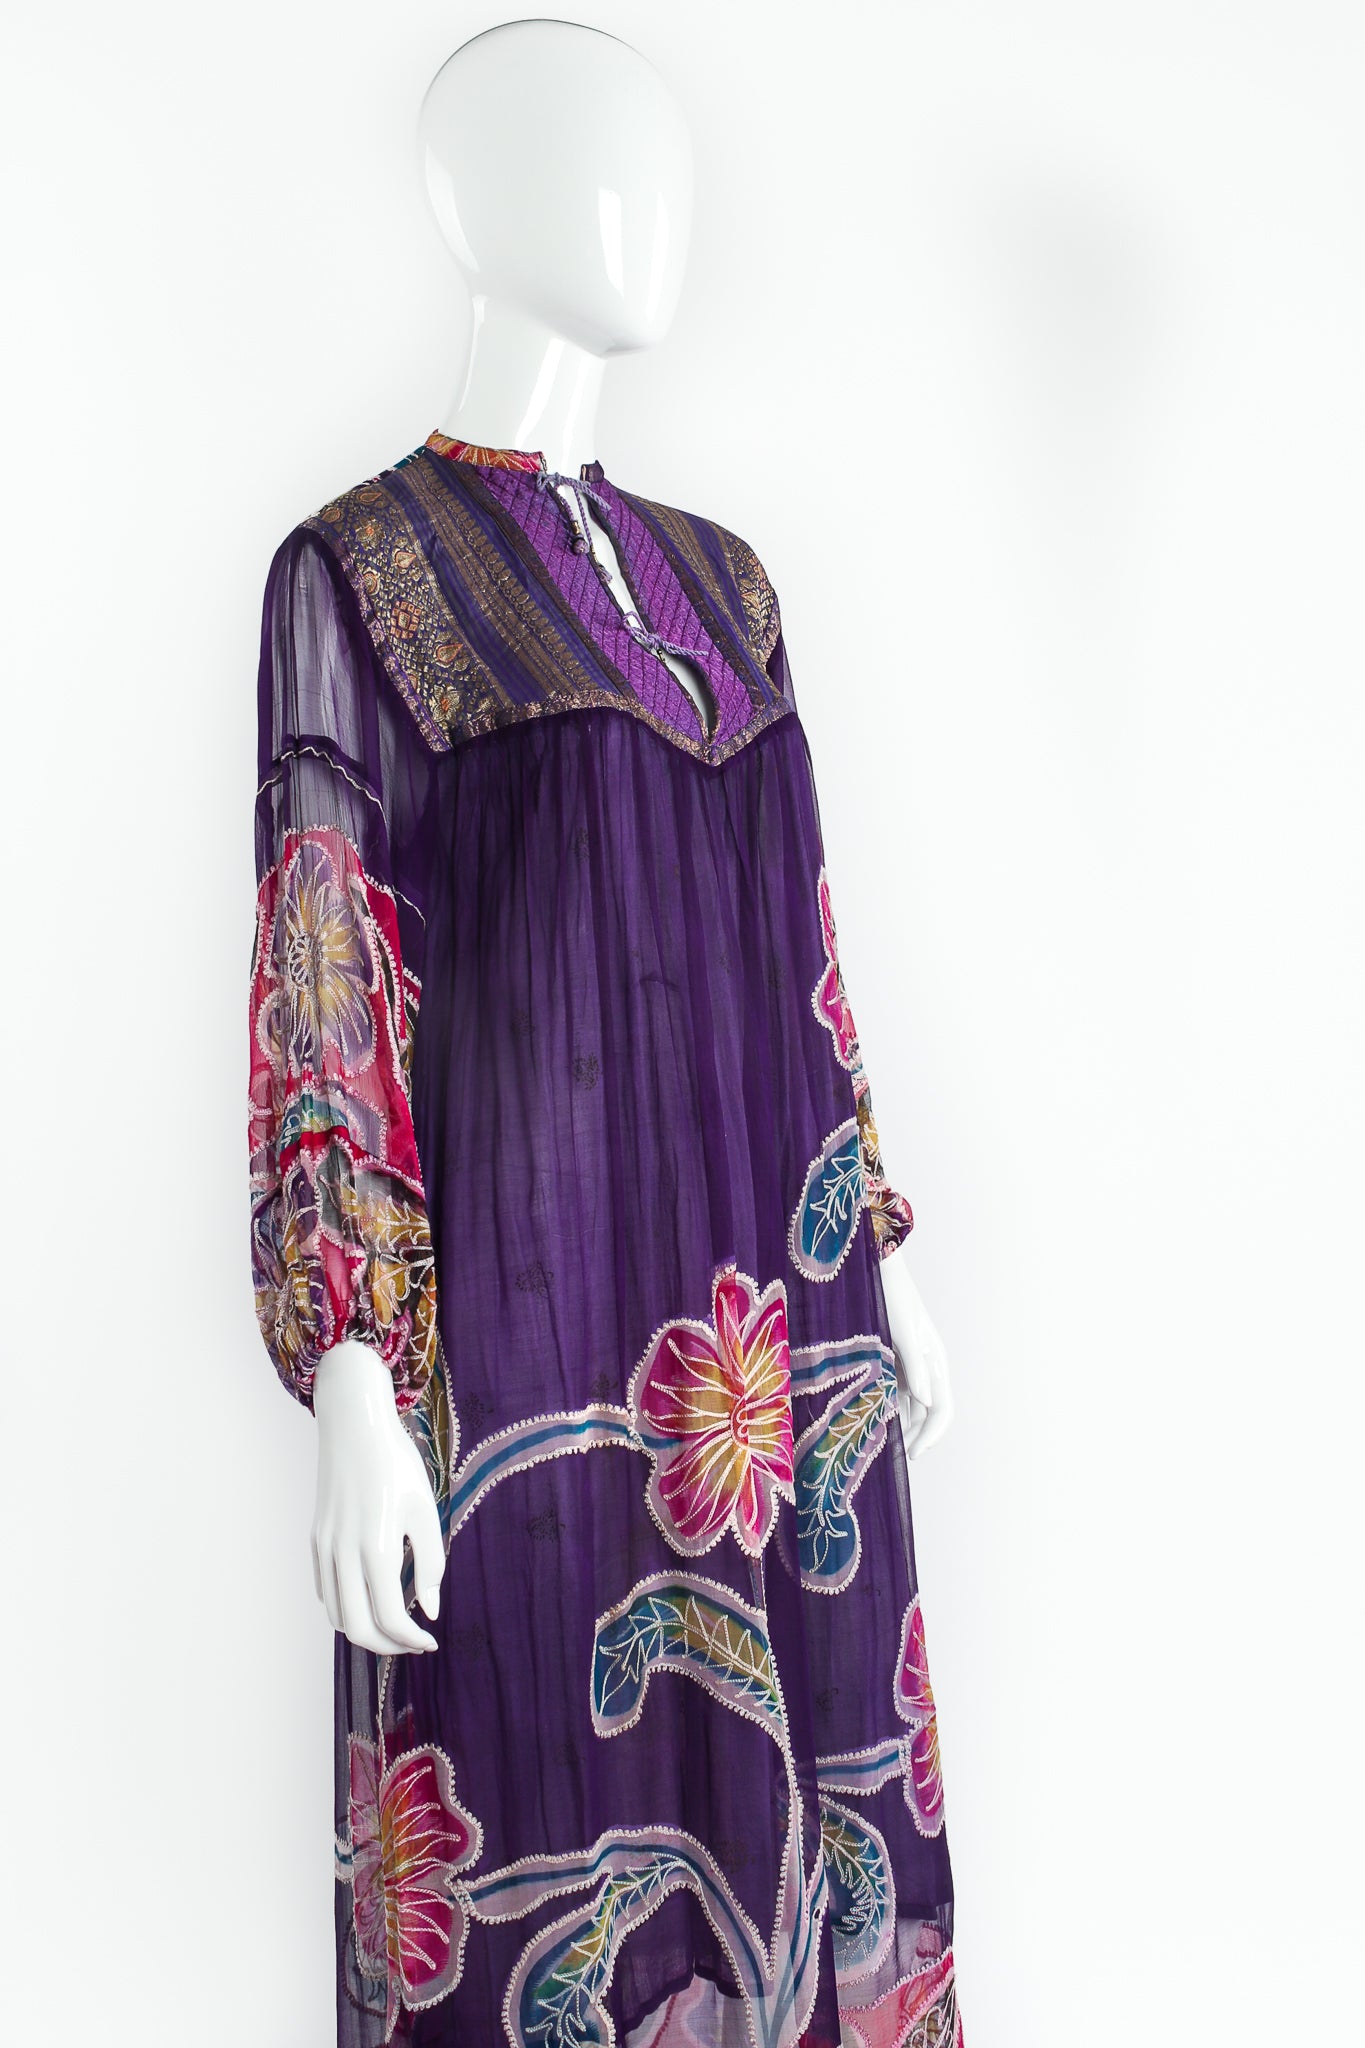 Vintage Silk Chiffon Floral Embroidered Indian Dress on Mannequin crop at Recess Los Angeles